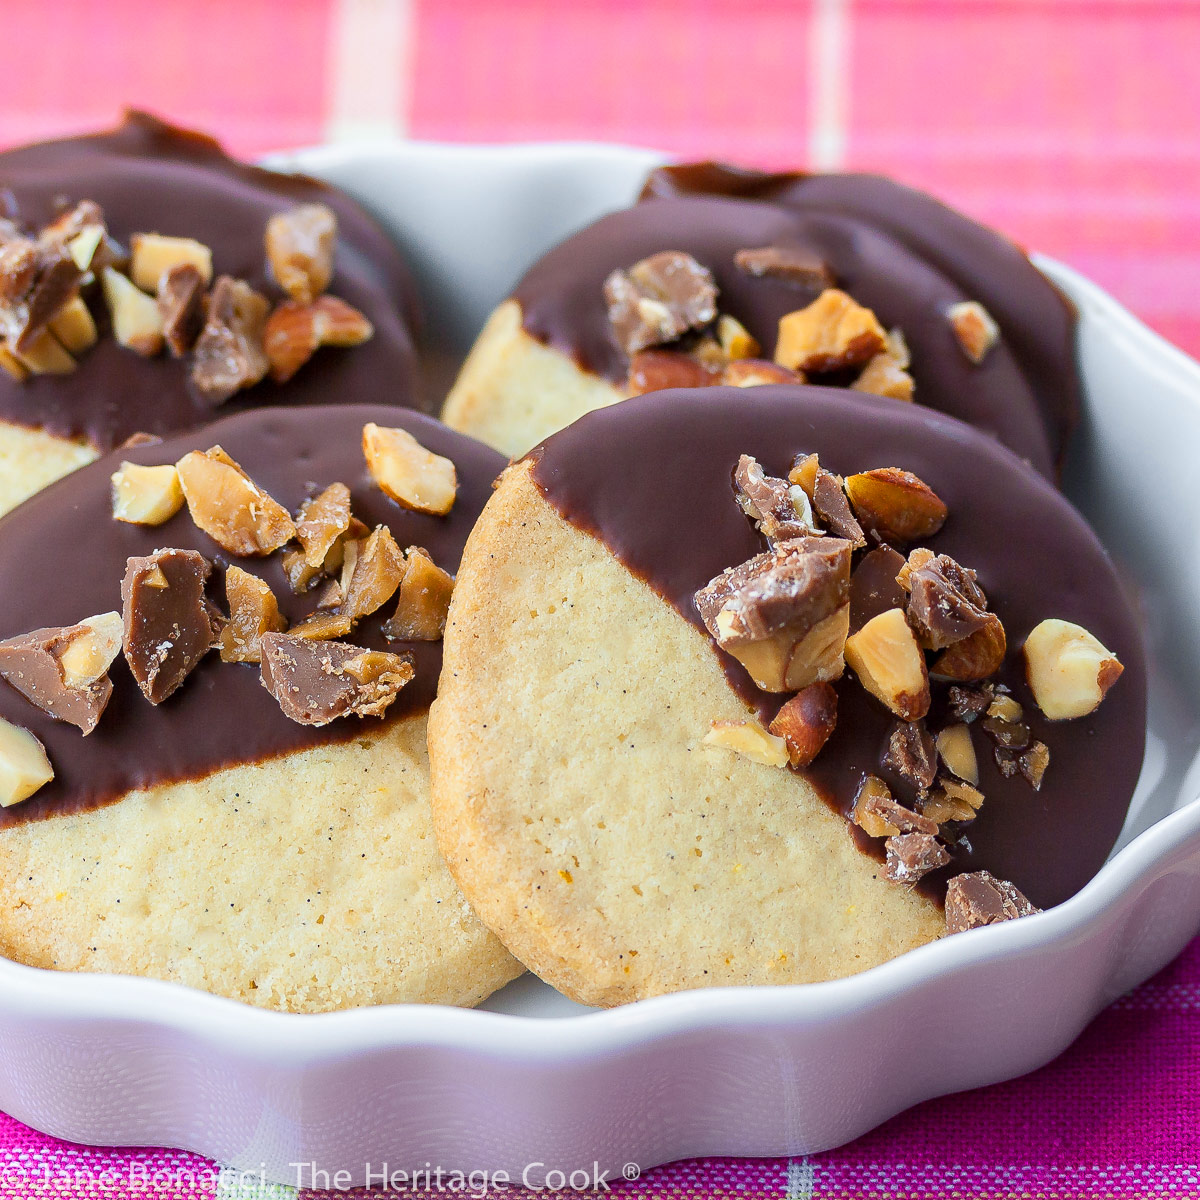 Toffee Topped Chocolate Dipped Butter Cookies (Gluten-Free); 2015 Jane Bonacci, The Heritage Cook